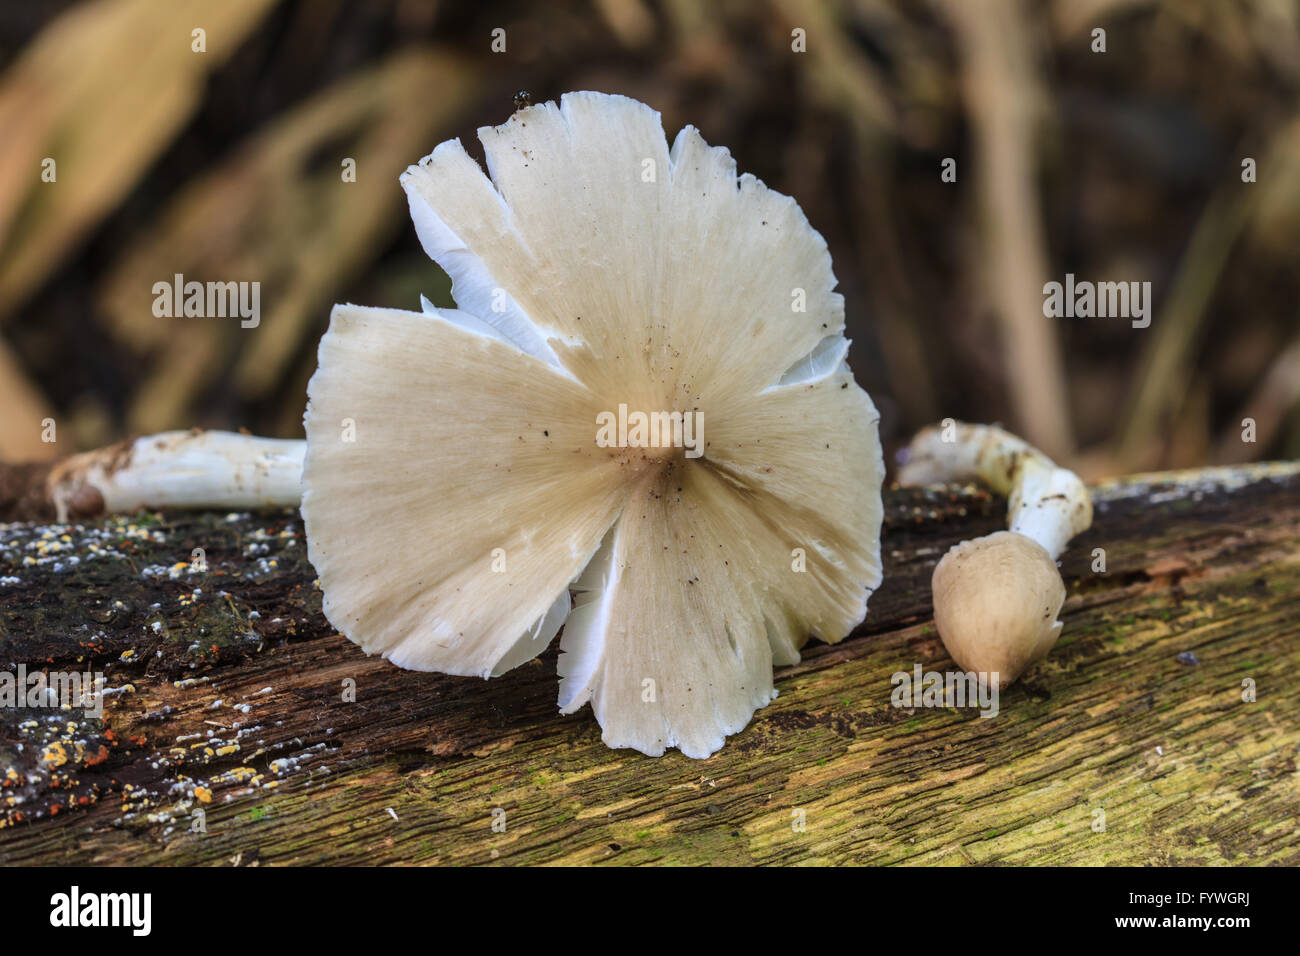 fresh termite mushroom on timber in tropical forest Stock Photo